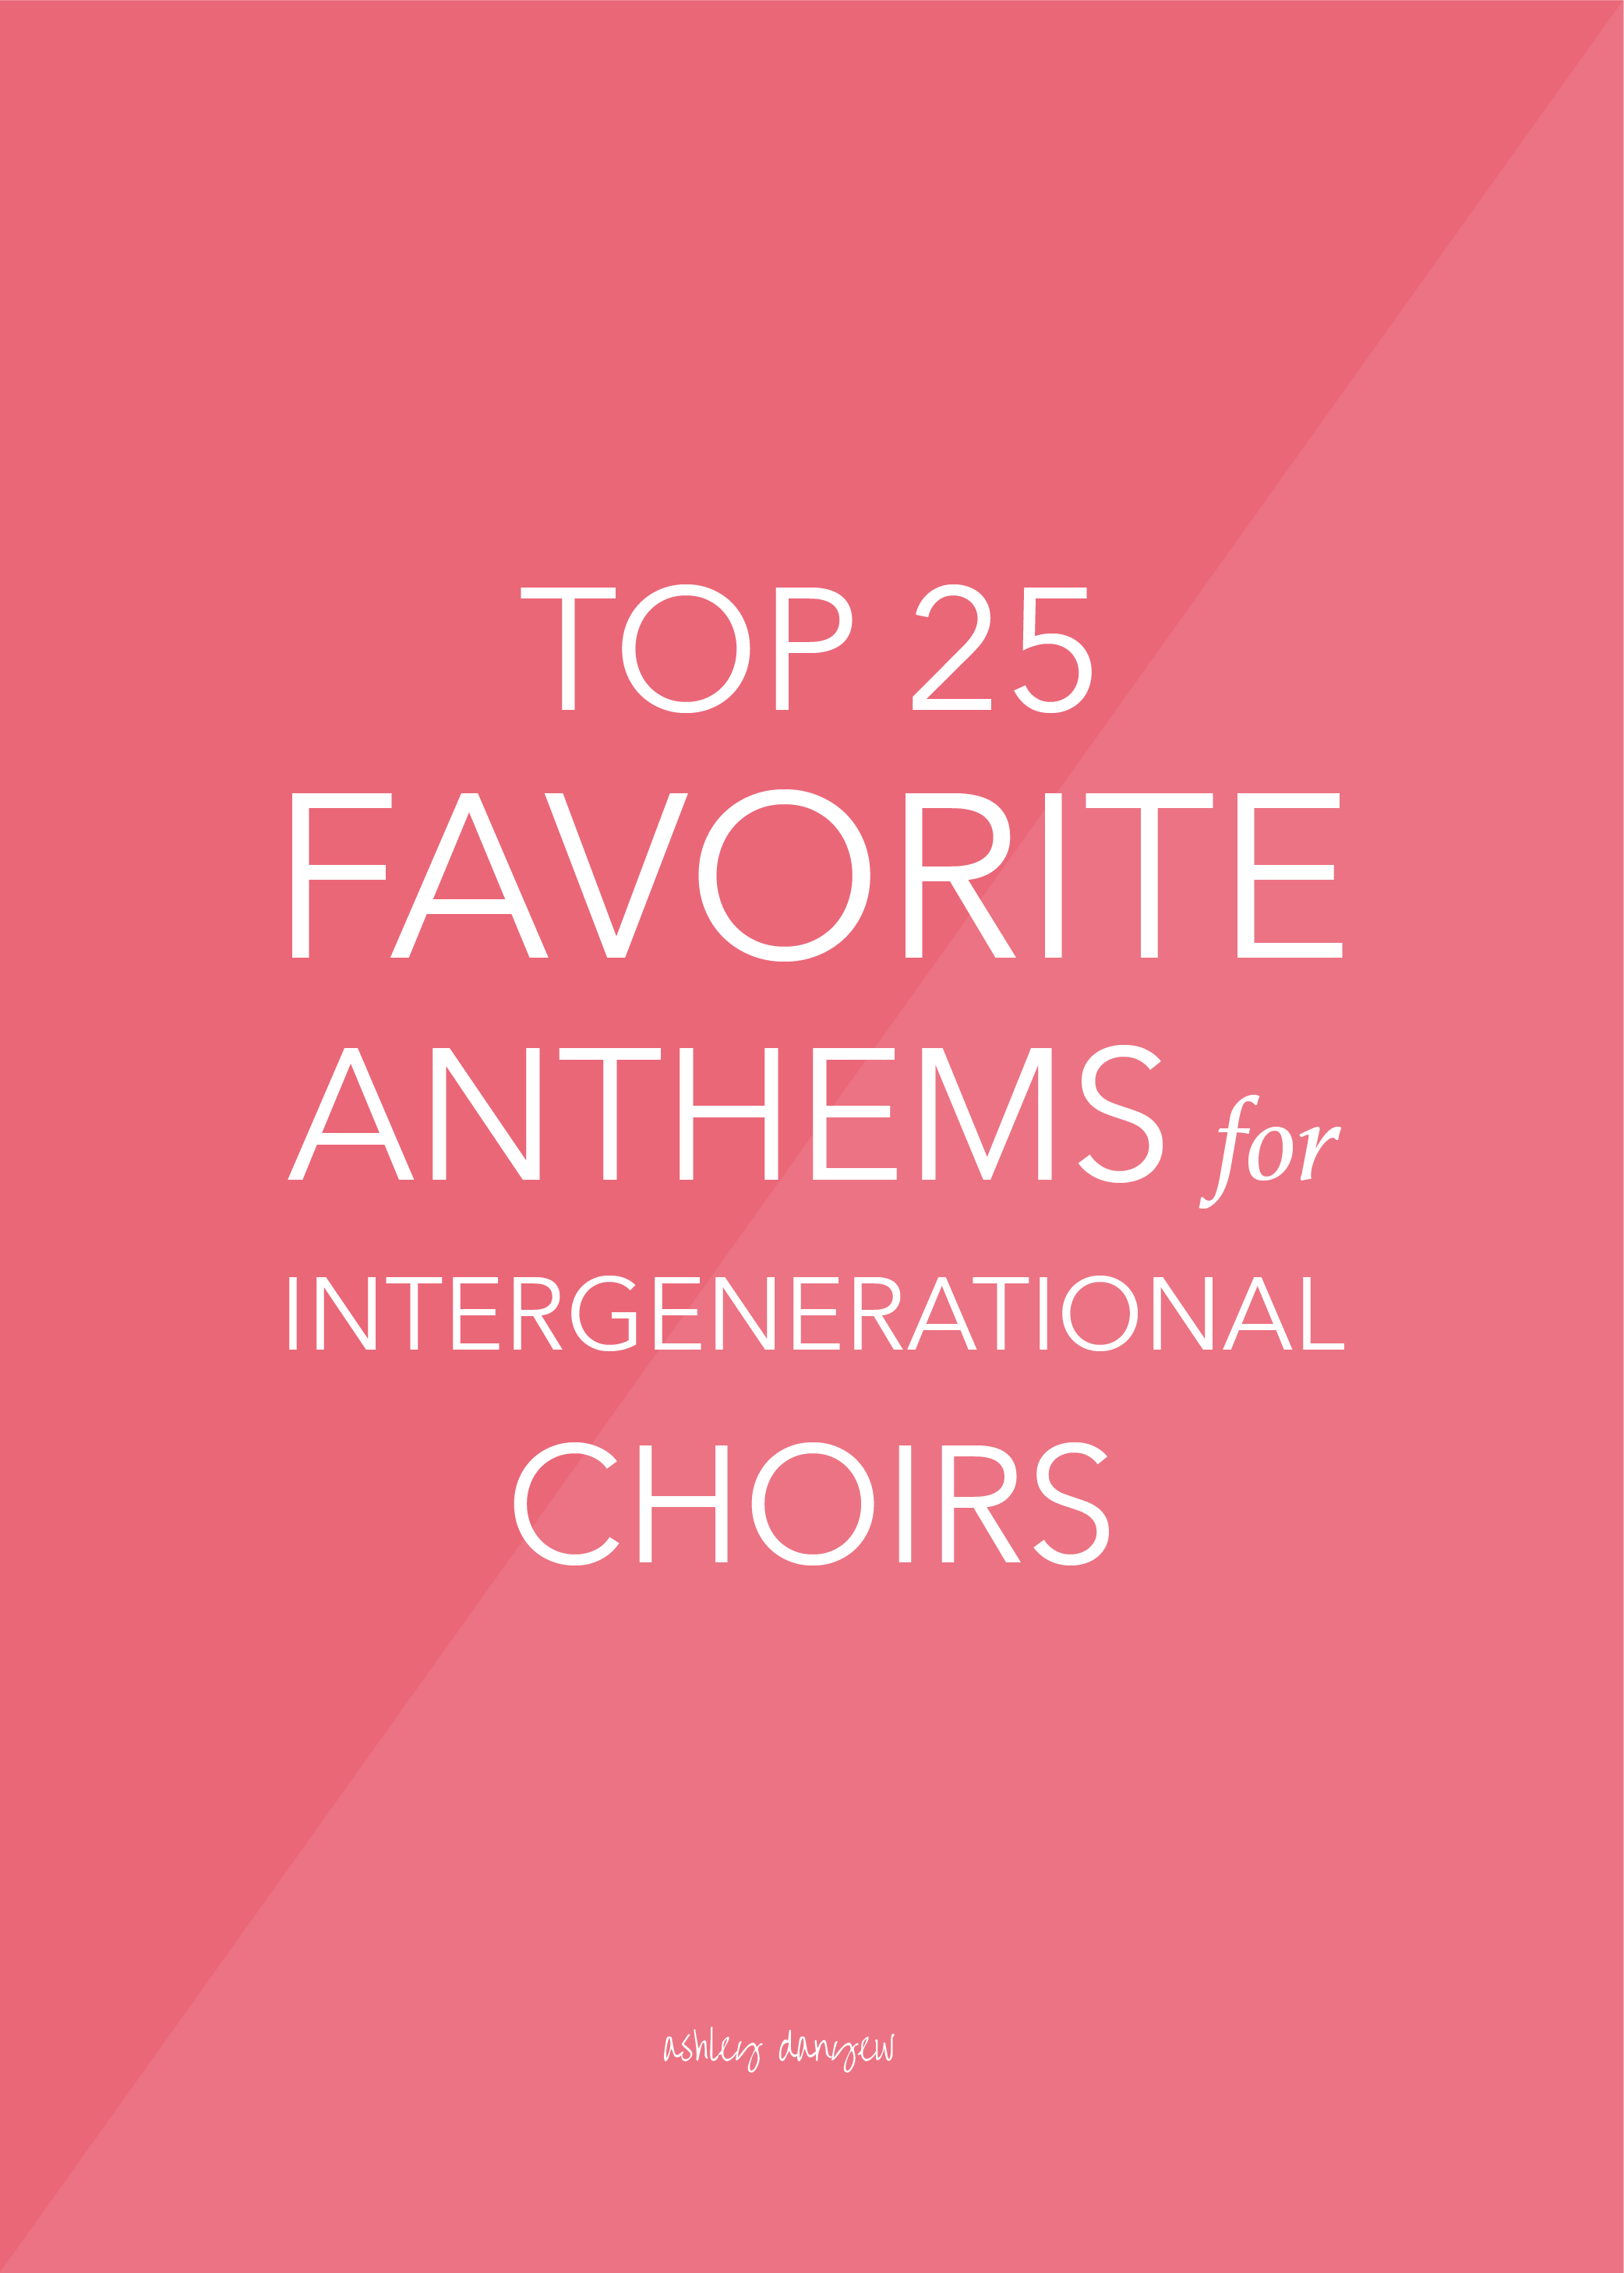 Copy of Top 25 Favorite Anthems for Intergenerational Choirs